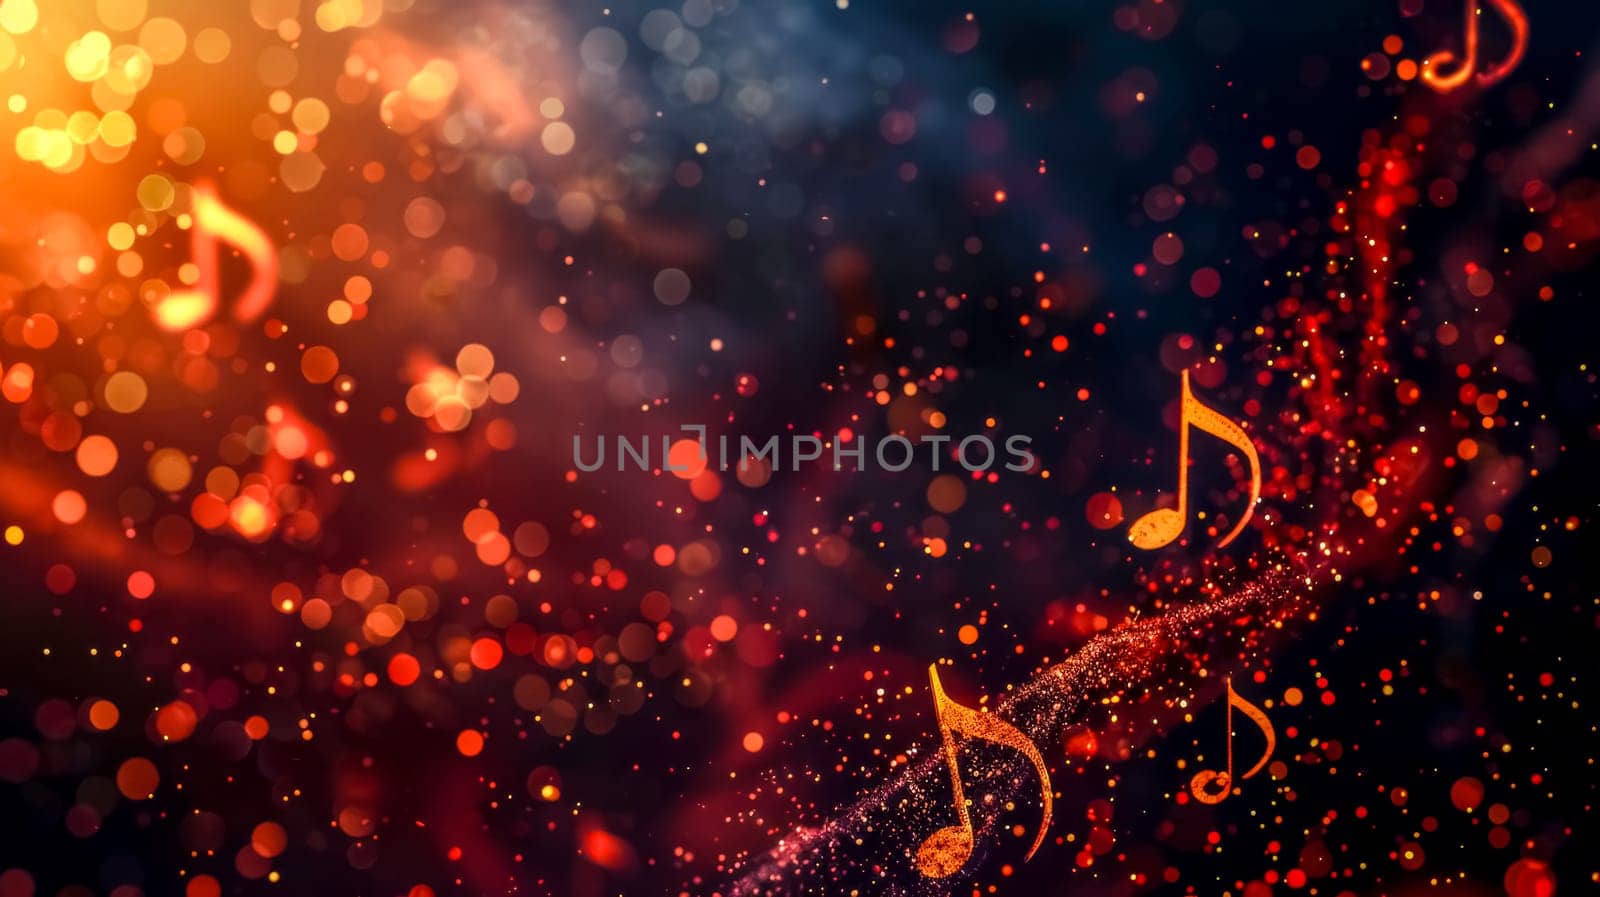 Colorful abstract background with glittering musical notes amidst a dreamy bokeh light effect